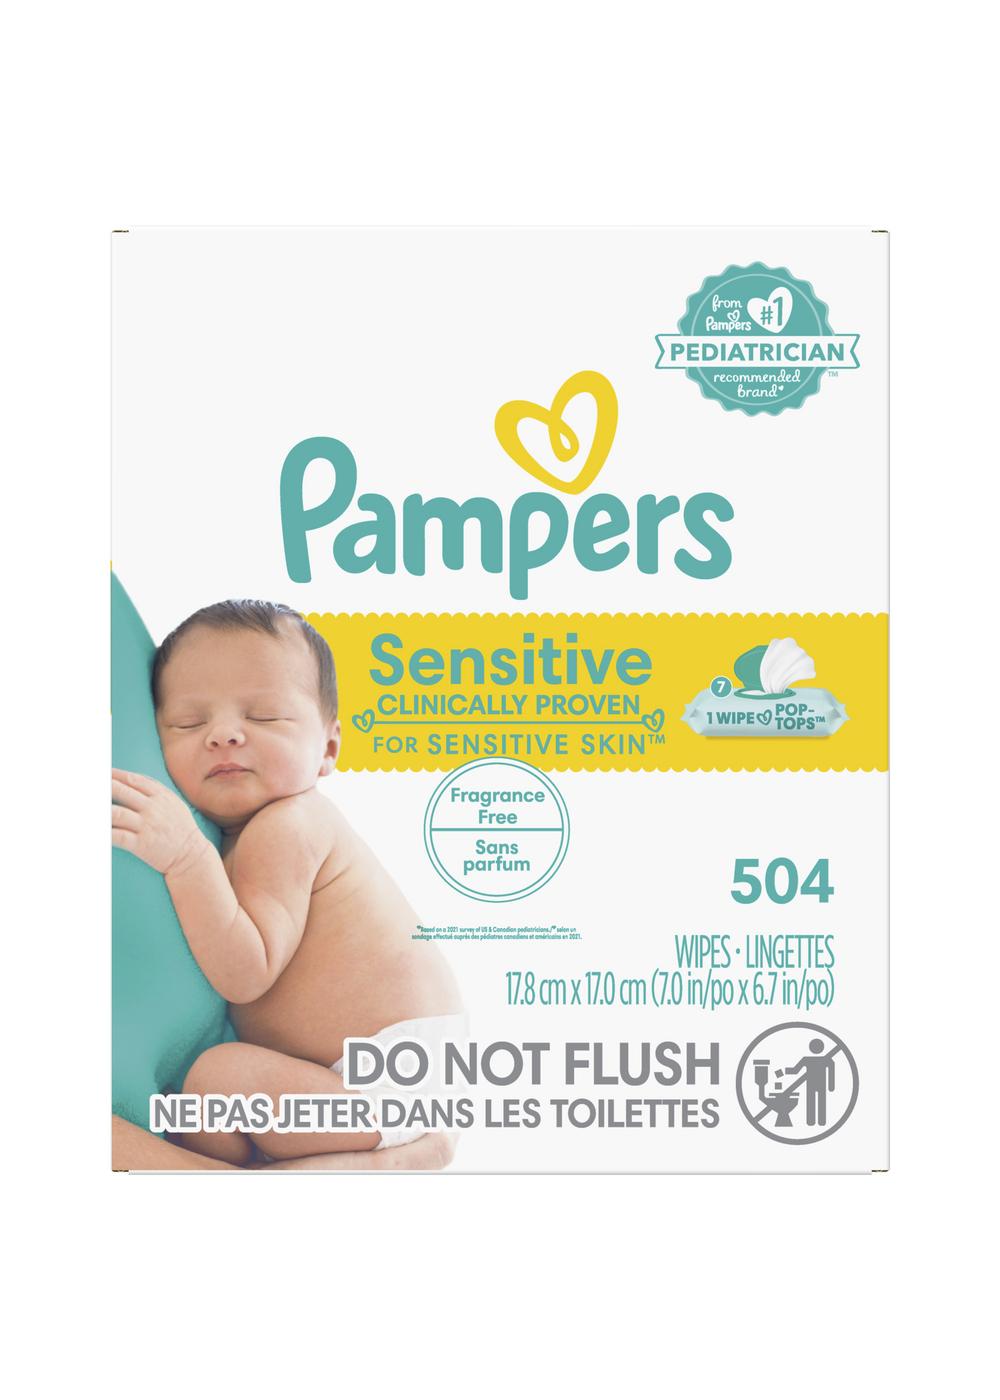 Pampers Sensitive Skin Baby Wipes 7 Pk; image 6 of 9